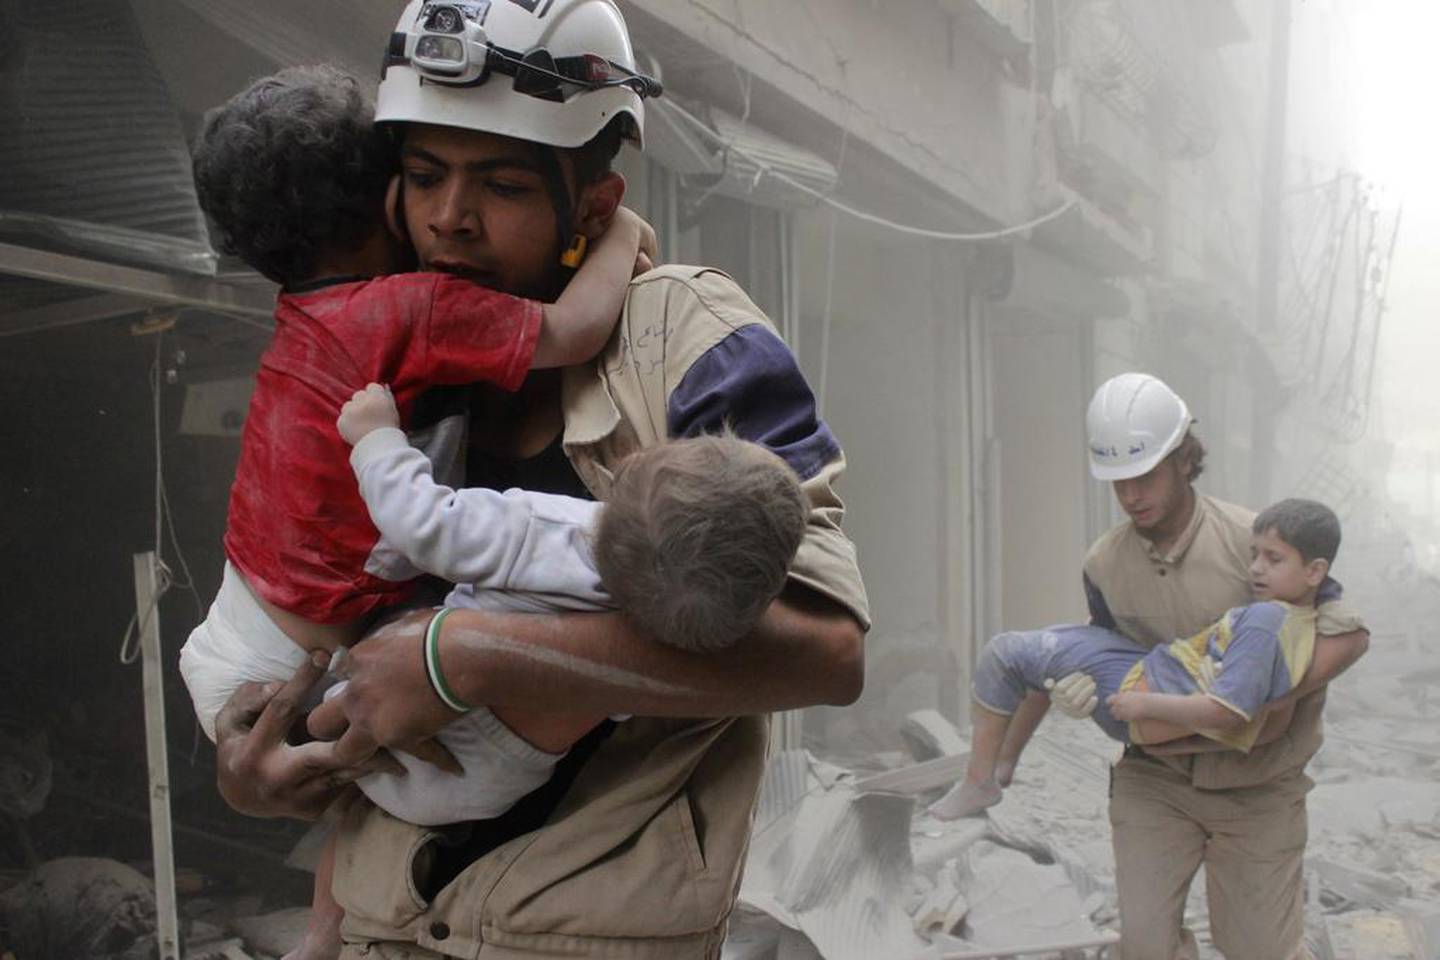 White Helmets rescue children in Aleppo after what activists said was an air strike by regime forces. Sultan Kitaz / Reuters